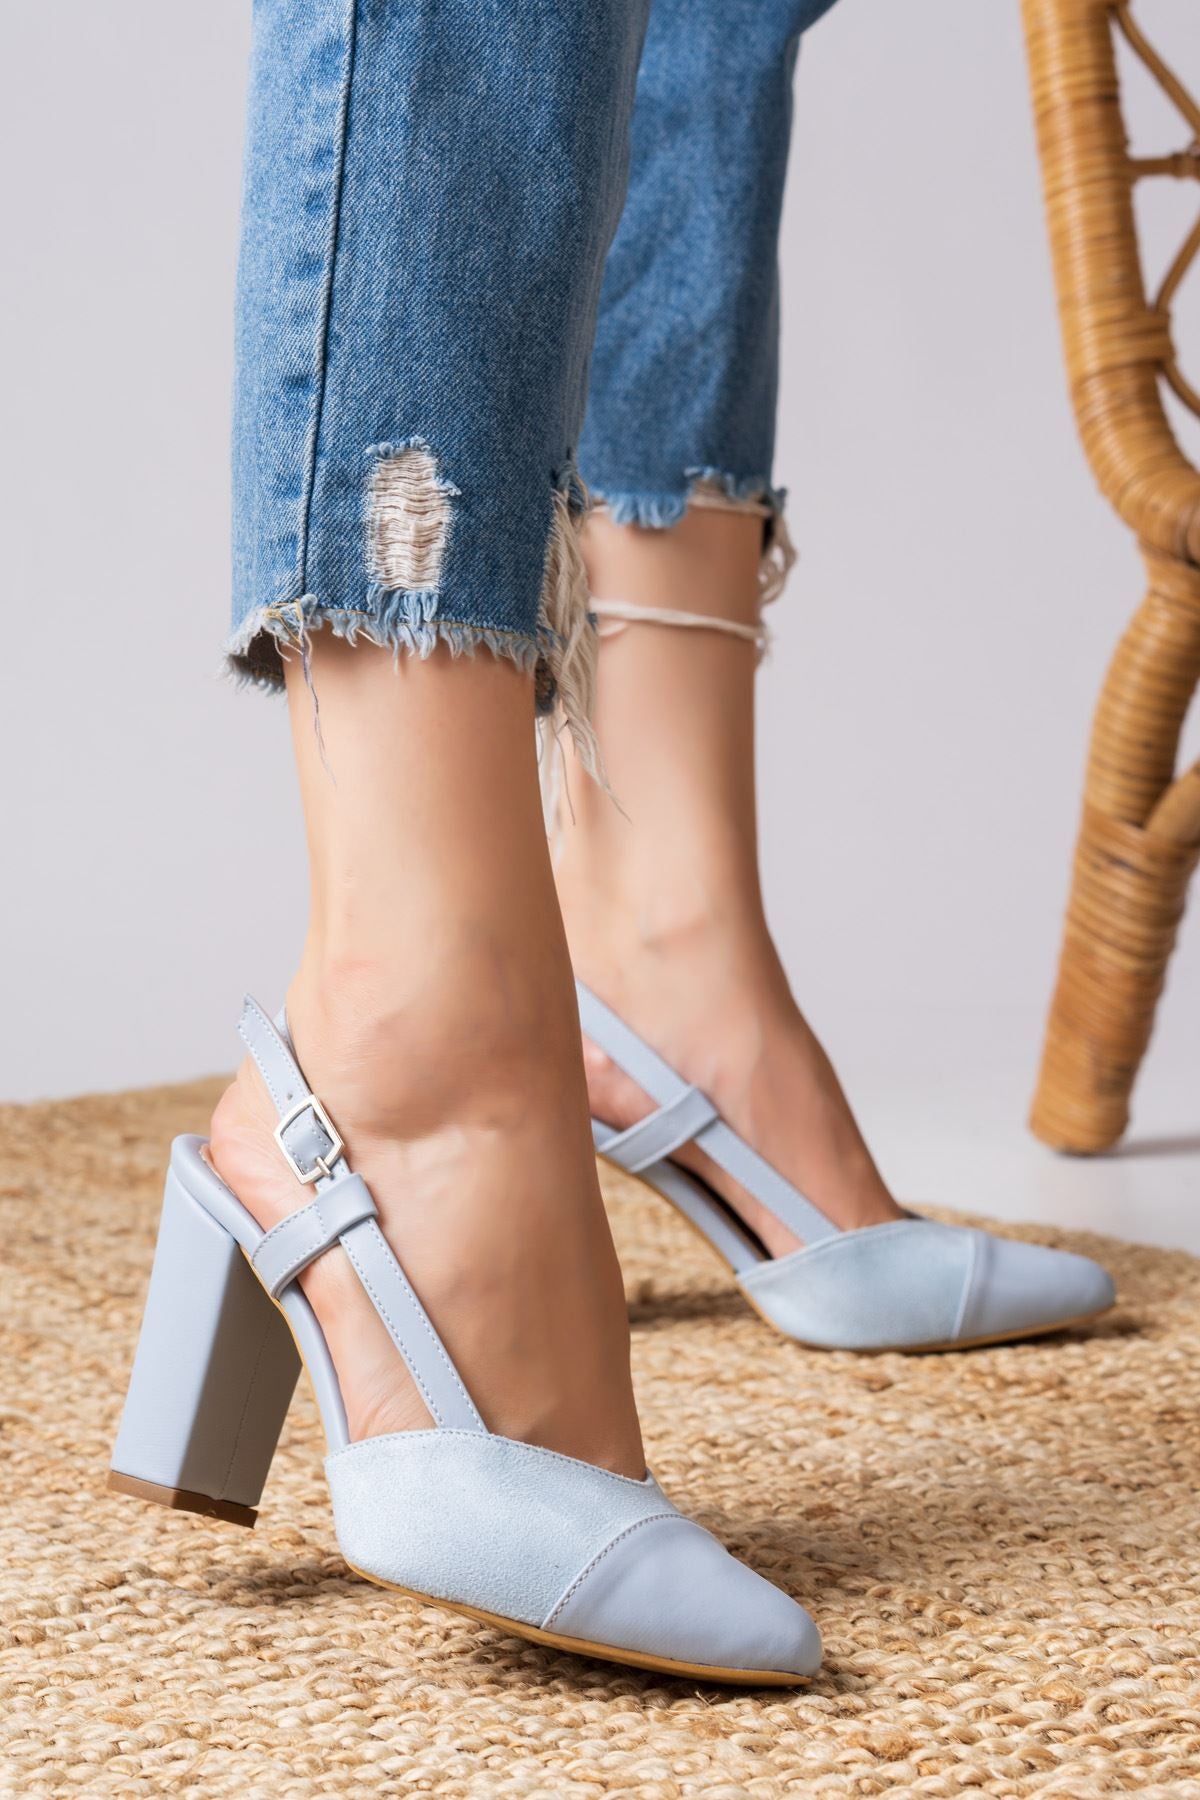 Molpo Baby Blue Skin - Suede High Heeled Women's Shoes - STREETMODE ™